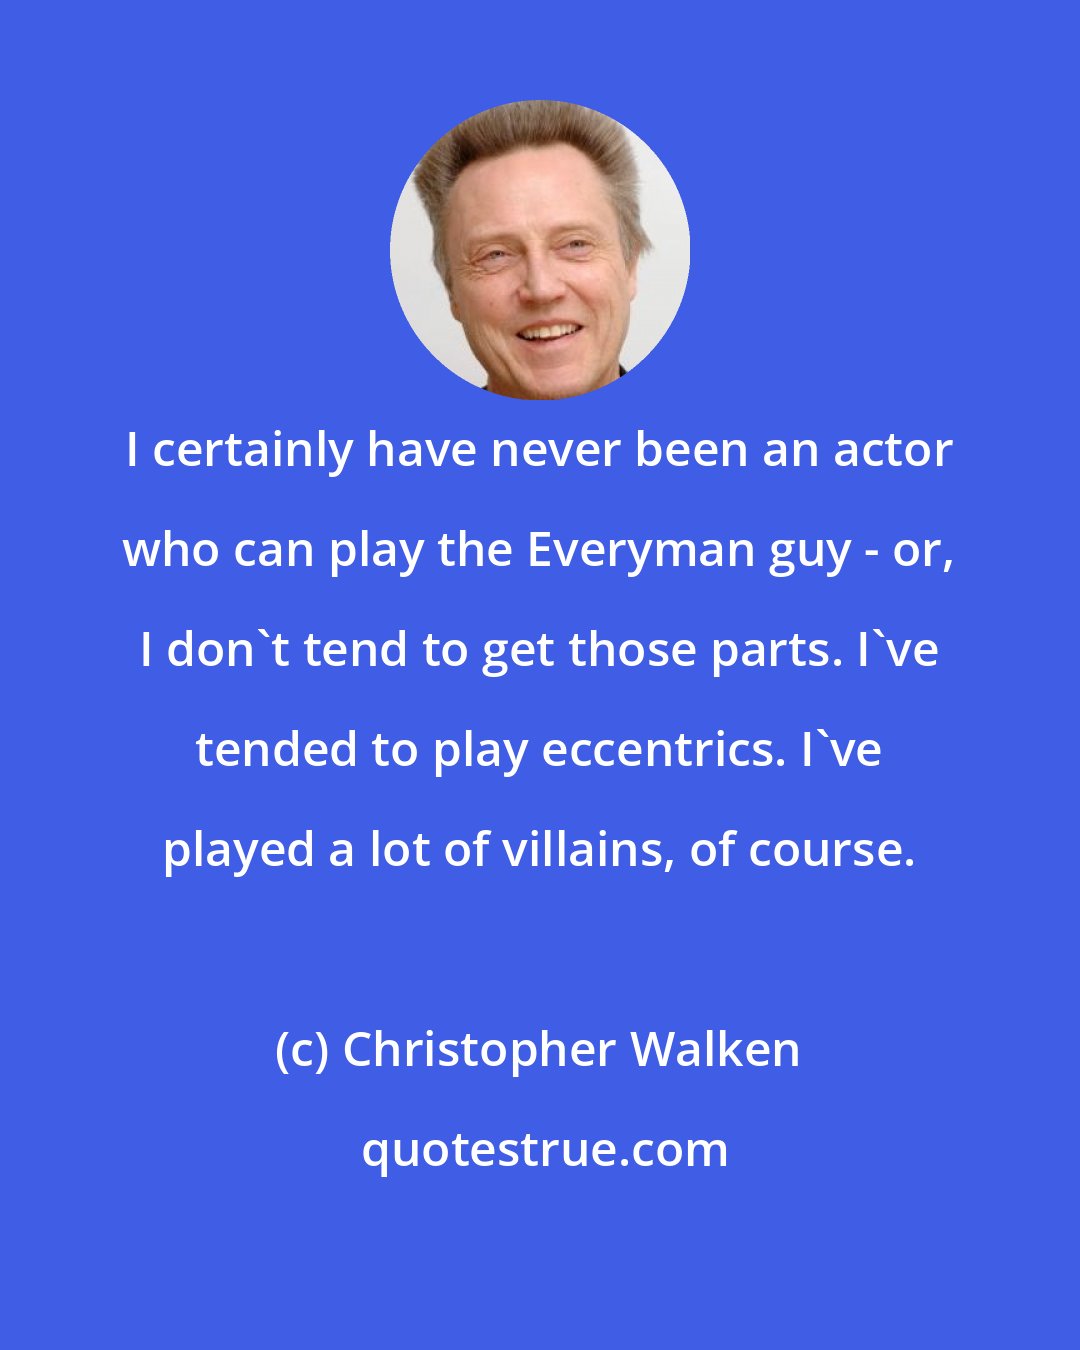 Christopher Walken: I certainly have never been an actor who can play the Everyman guy - or, I don't tend to get those parts. I've tended to play eccentrics. I've played a lot of villains, of course.